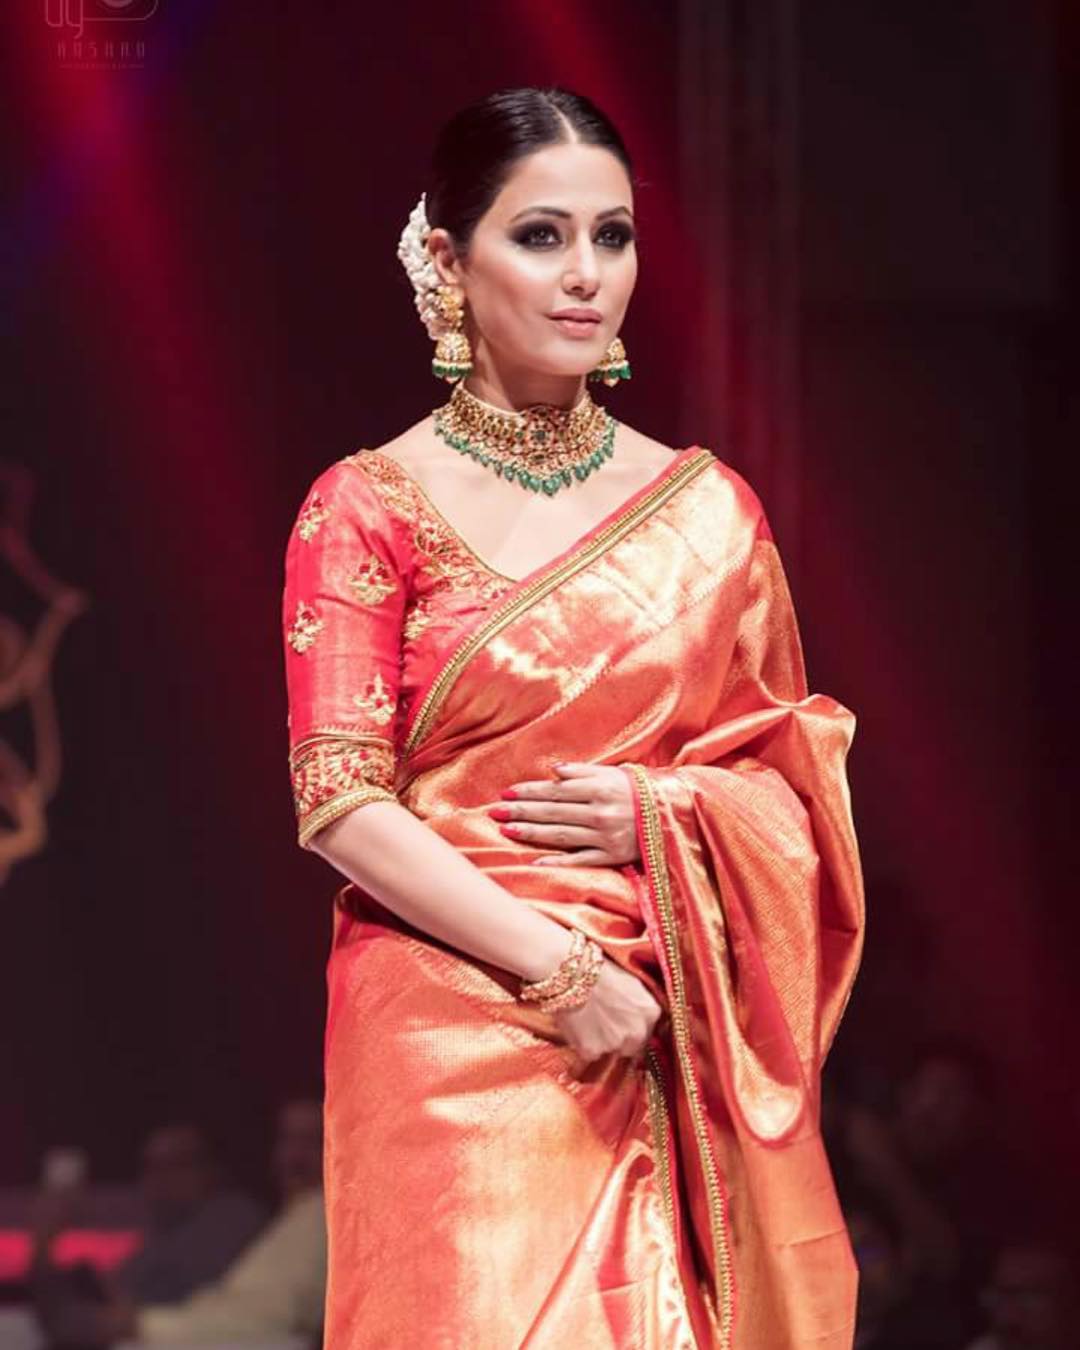 Hina Khan Looked Drop Dead Gorgeous In Red Kanjeevaram Saree Lady India 